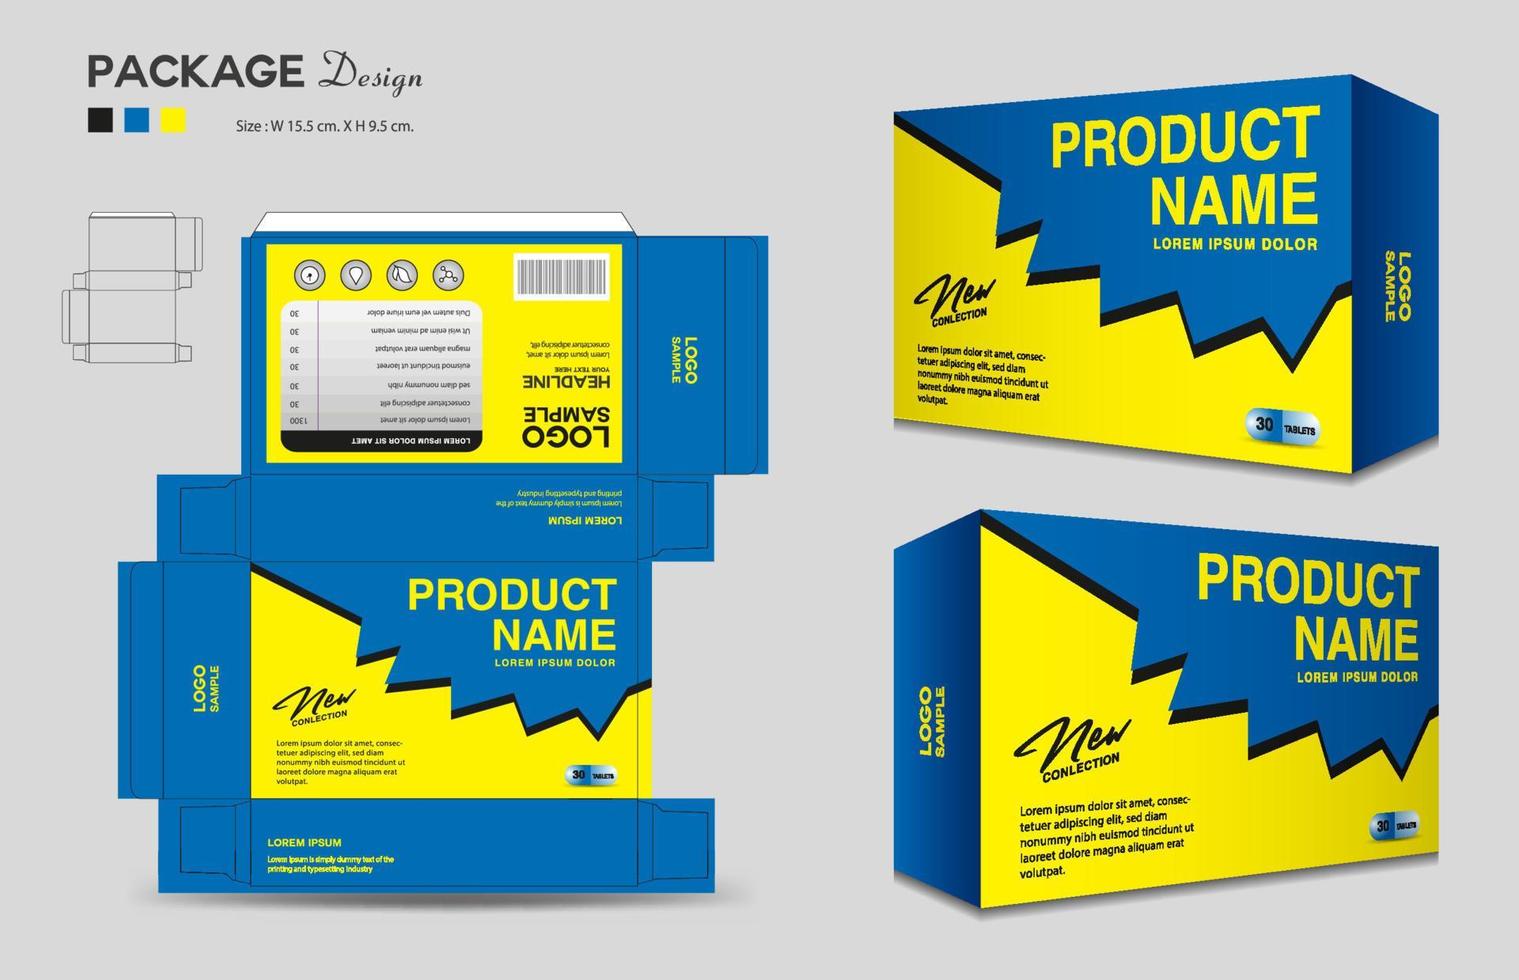 Supplements and Cosmetic box design, Package design template, box outline, Box Packaging, Label design, healthcare label, packaging design creative idea vector, realistic mock-up vector